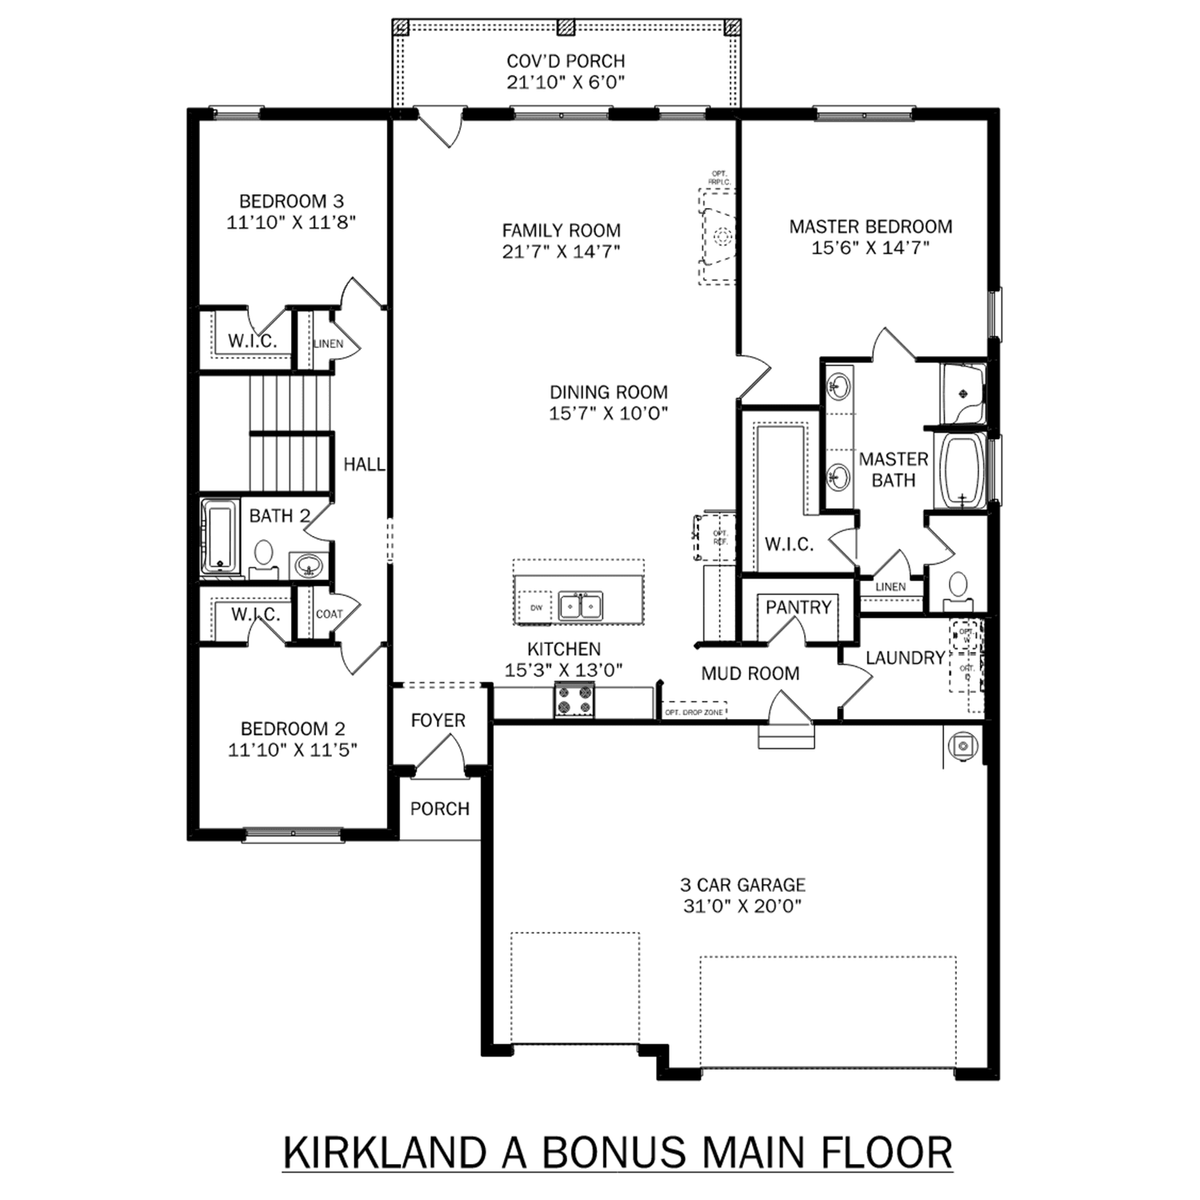 1 - The Kirkland with Bonus floor plan layout for 604 Ronnie Drive SE in Davidson Homes' Cain Park community.